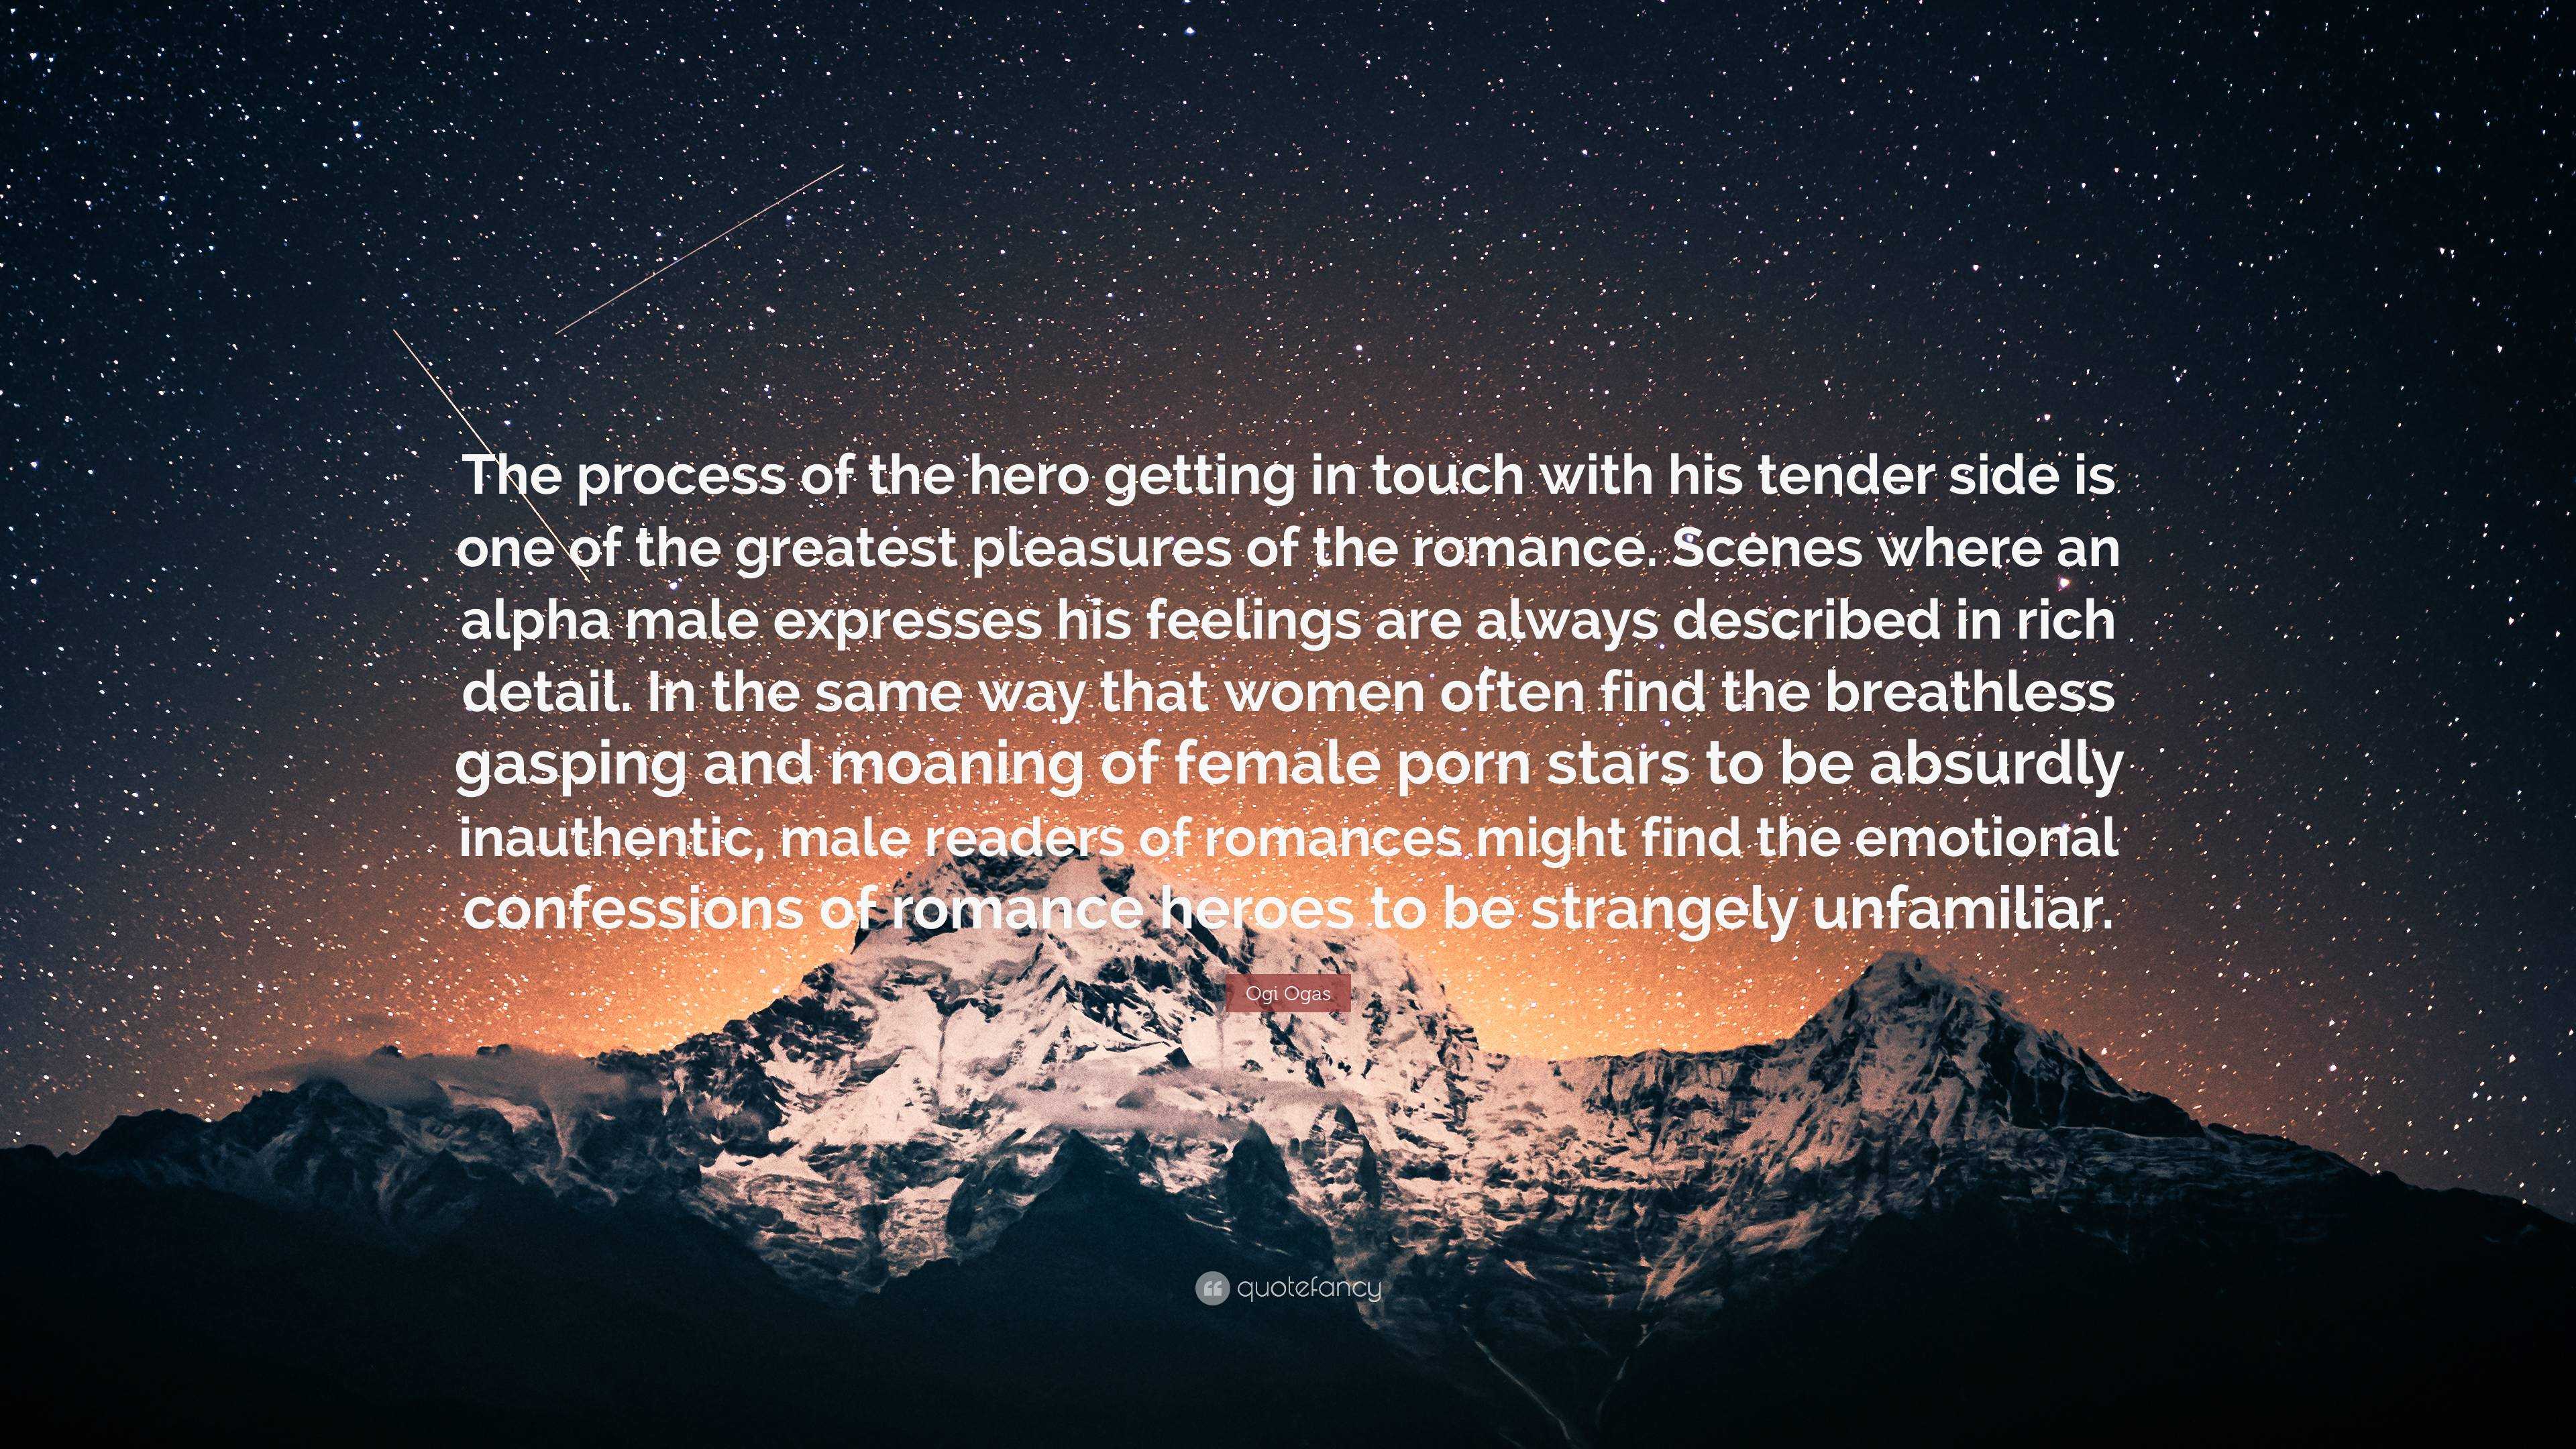 Femaleporn Stars - Ogi Ogas Quote: â€œThe process of the hero getting in touch with his tender  side is one of the greatest pleasures of the romance. Scenes wh...â€